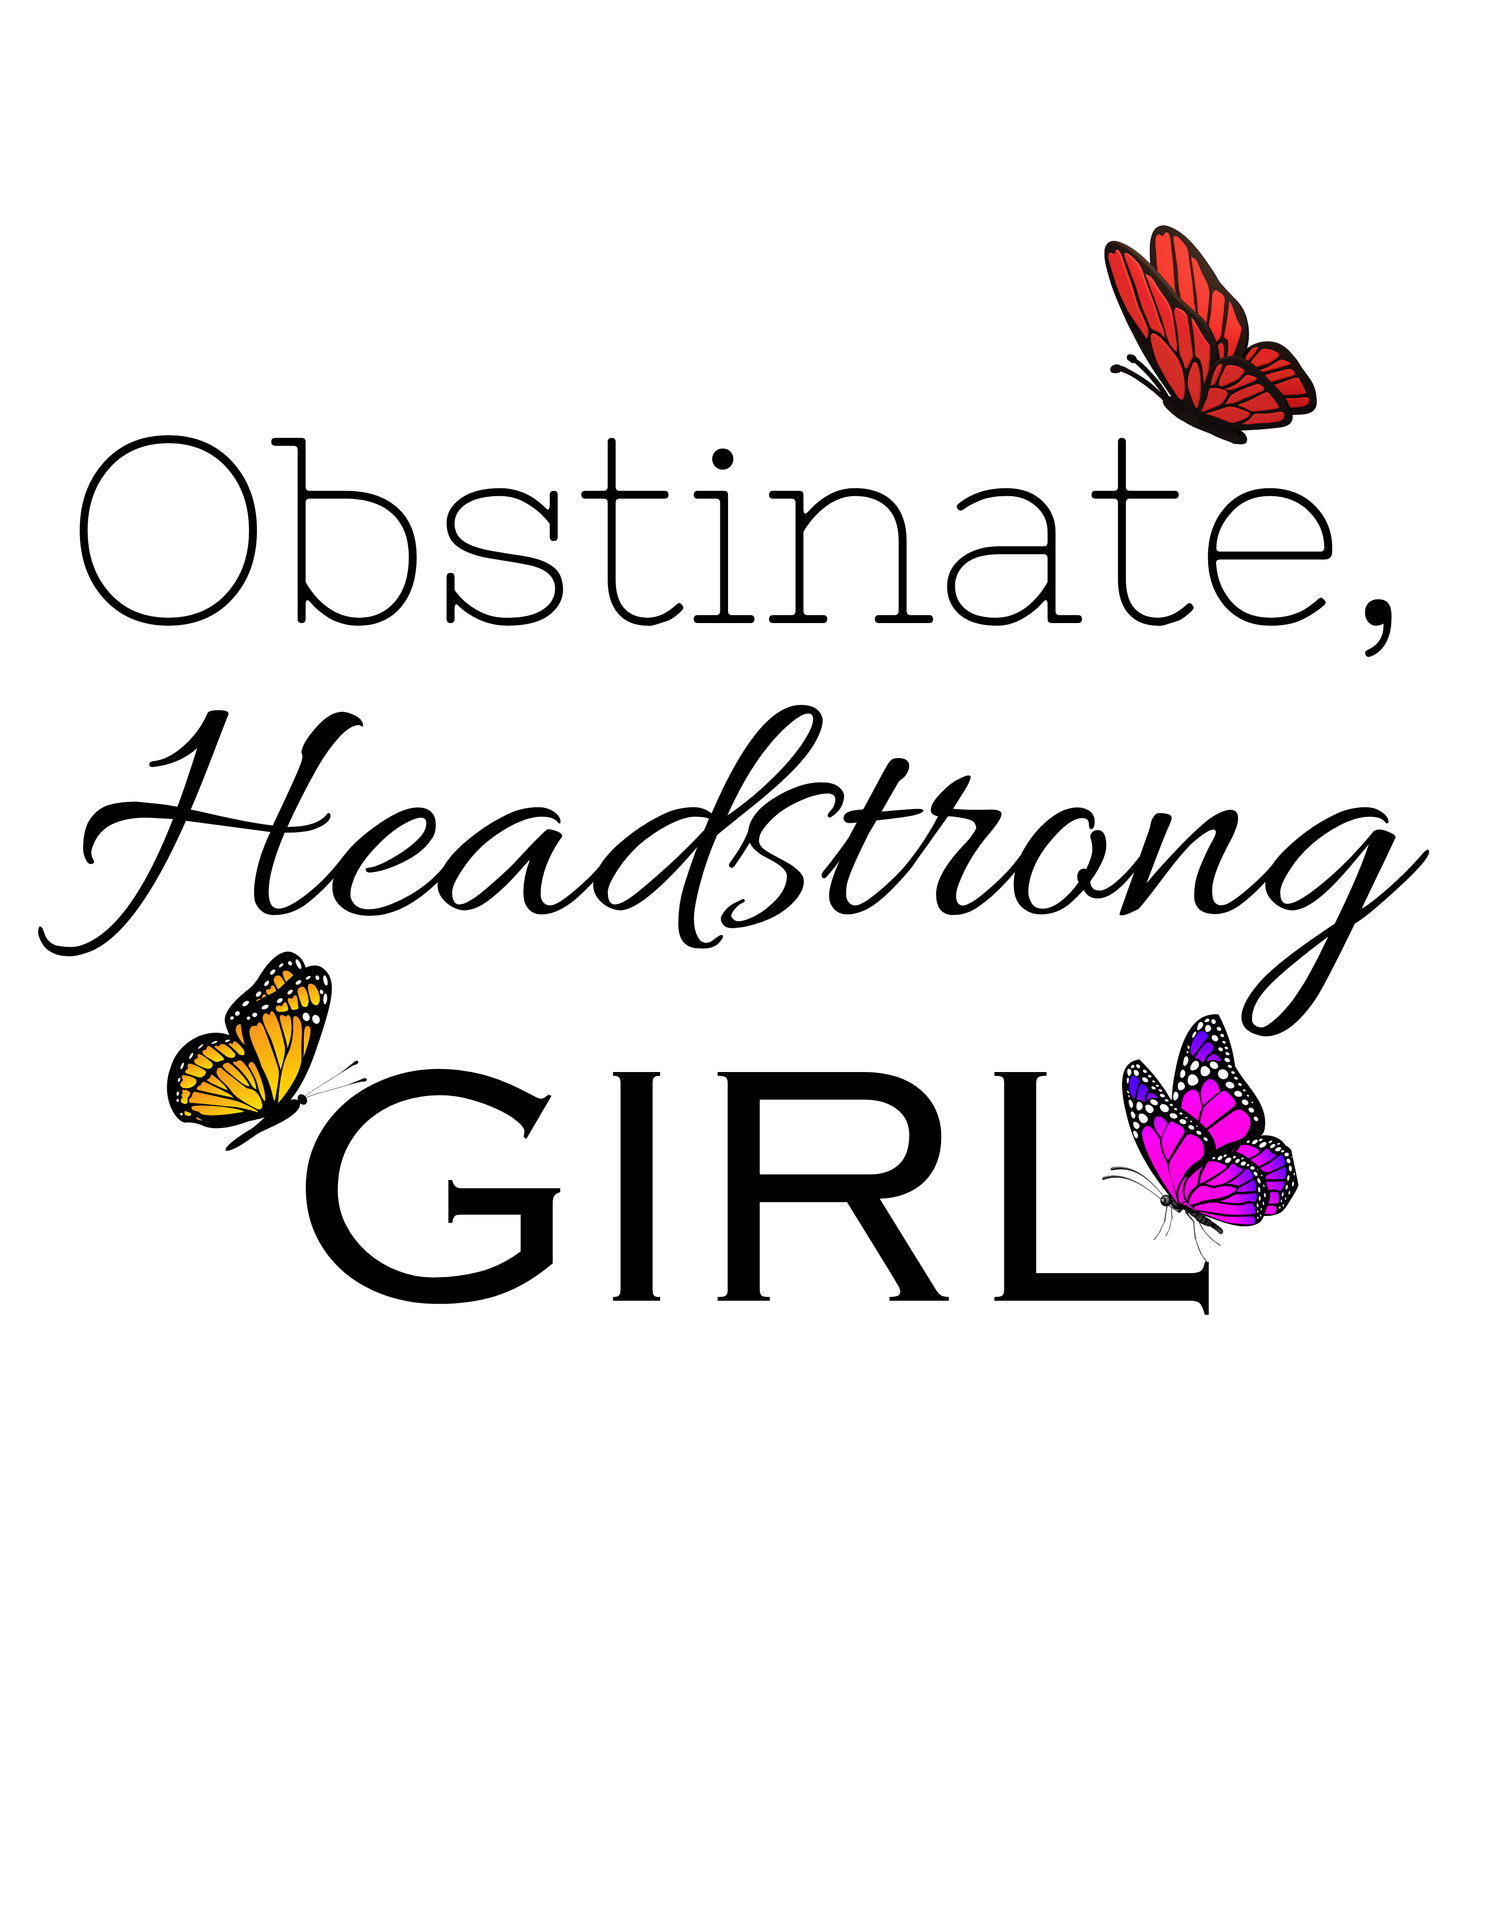 Obstinate, Headstrong Girl